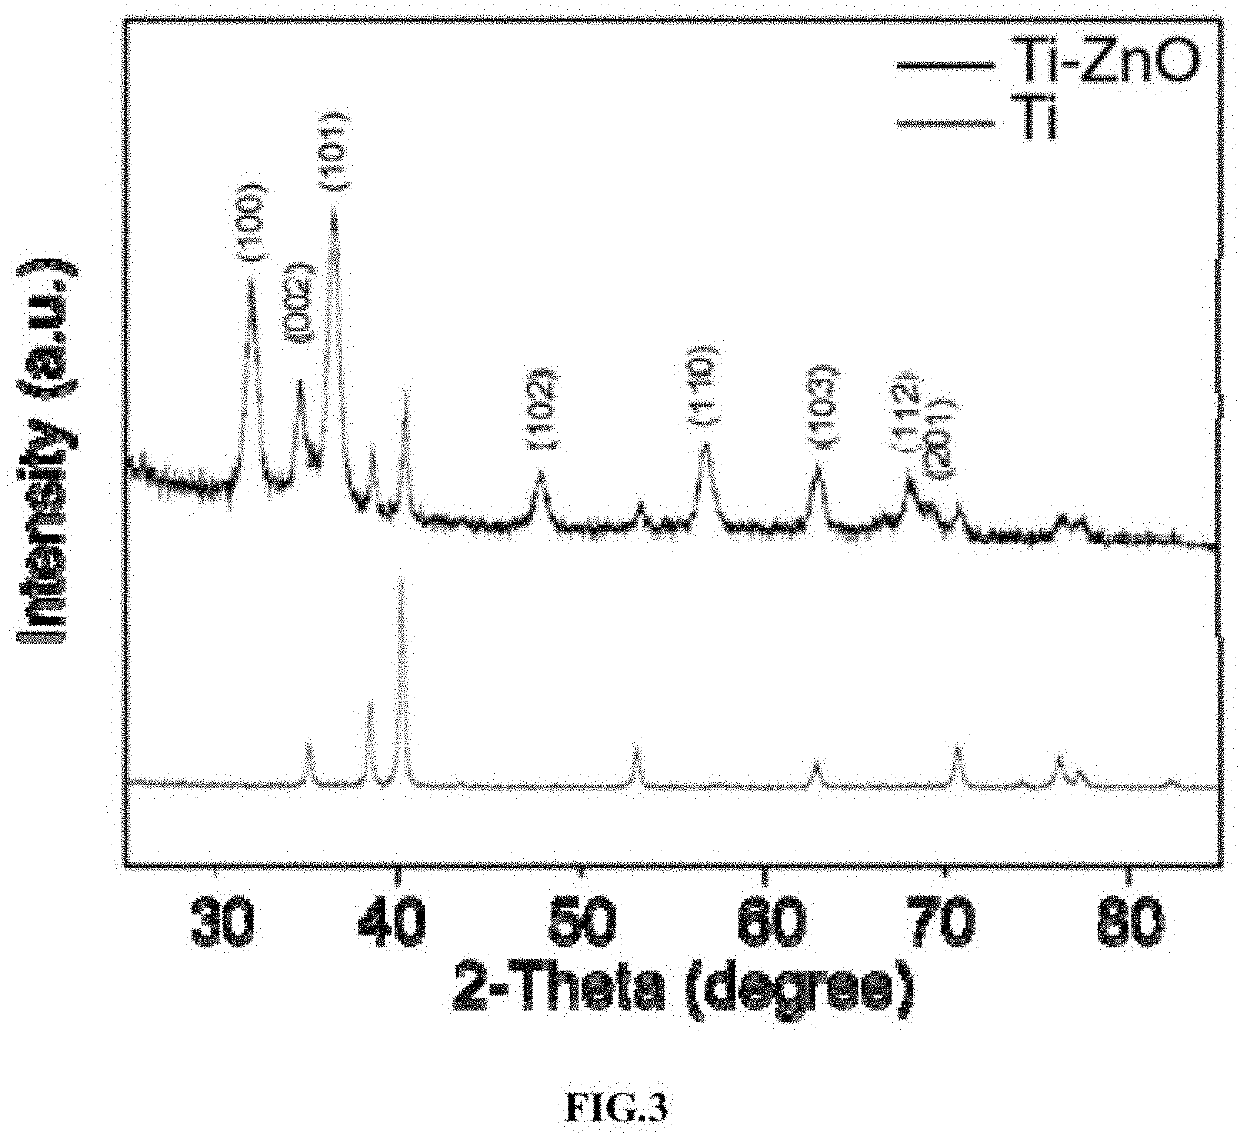 Dual light-responsive zinc oxide and preparation method thereof as well as photosensitive coating with antibacterial/osteogenic properties